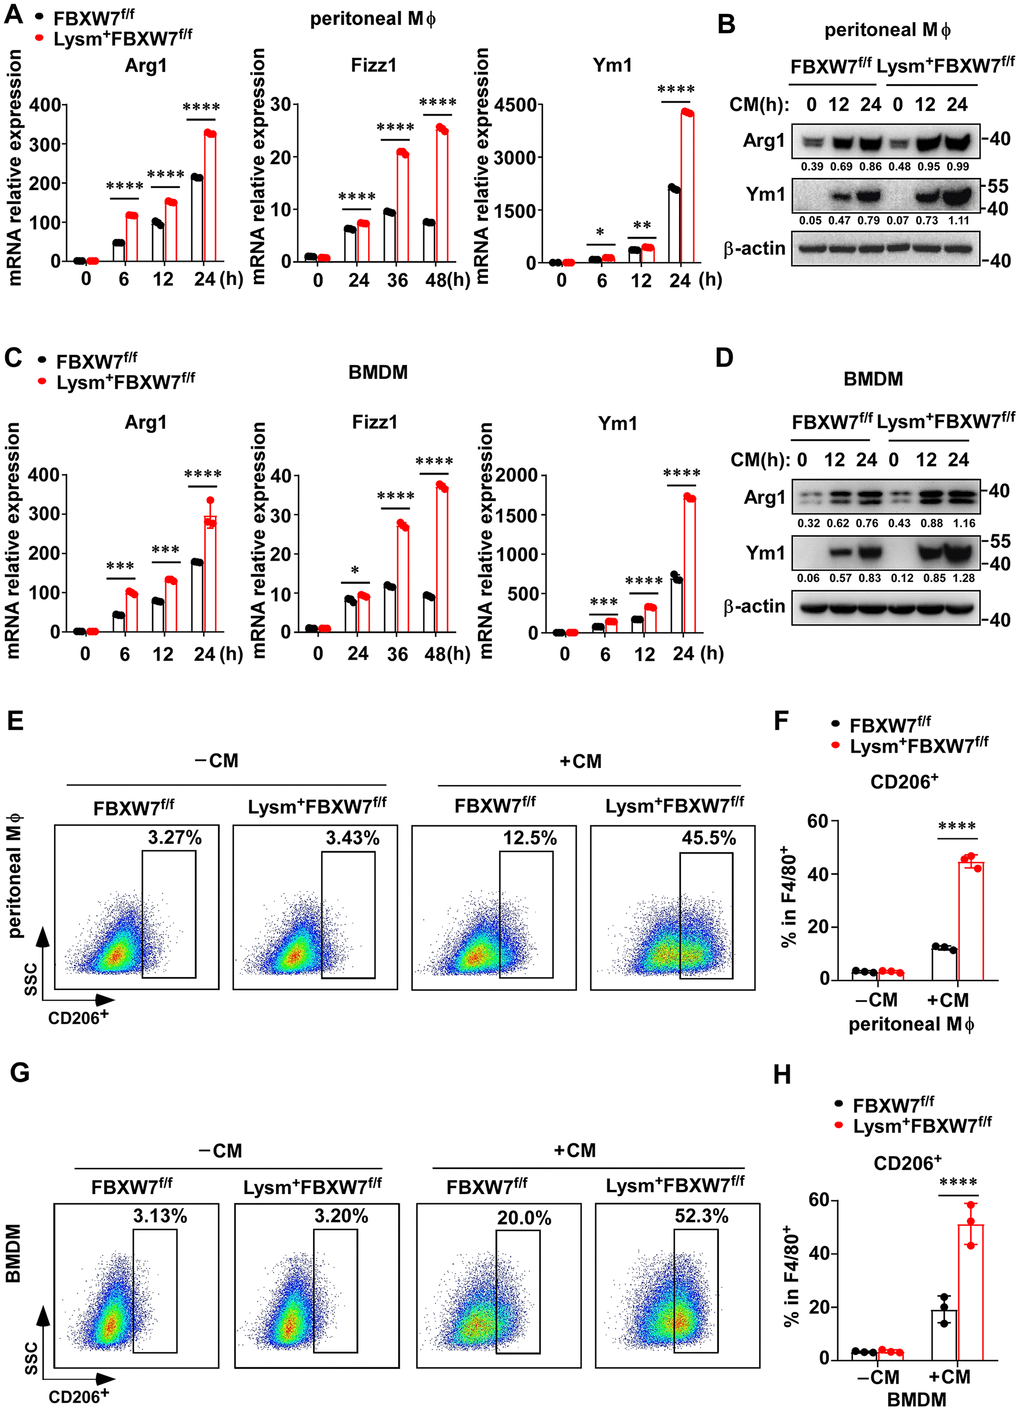 FBXW7 knockout facilitates M2 macrophage polarization in a tumor microenvironment-mimicking condition. (A) Peritoneal macrophages extracted from FBXW7f/f and Lysm+FBXW7f/f mice were treated with conditioned medium containing LLC supernatant. The mRNA expression of Arg1, Fizz1, and Ym1 were analyzed by qRT-PCR. (B) The protein levels of Arg1 and Ym1 in wild-type and FBXW7-knockout peritoneal macrophages were detected by immunoblotting after conditioned medium stimulation. (C, D) The mRNA (C) and protein (D) expression of Arg1, Fizz1, and Ym1 were analyzed by qRT-PCR and western blotting, respectively, in BMDMs incubated with conditioned medium. (E, F) Flow cytometry analysis (E) and statistical analysis (F) of the percentage of M2 macrophages (CD206+) in wild-type and FBXW7-knockout peritoneal macrophages stimulated with conditioned medium (n = 3 per group). (G, H) Flow cytometry analysis (G) and statistical analysis (H) of the percentage of M2 macrophages (CD206+) in wild-type and FBXW7-knockout BMDMs stimulated with conditioned medium (n = 3 per group). Data are shown as the mean ± SD and are representative of three independent experiments. *P P P P A, C, F, H)).